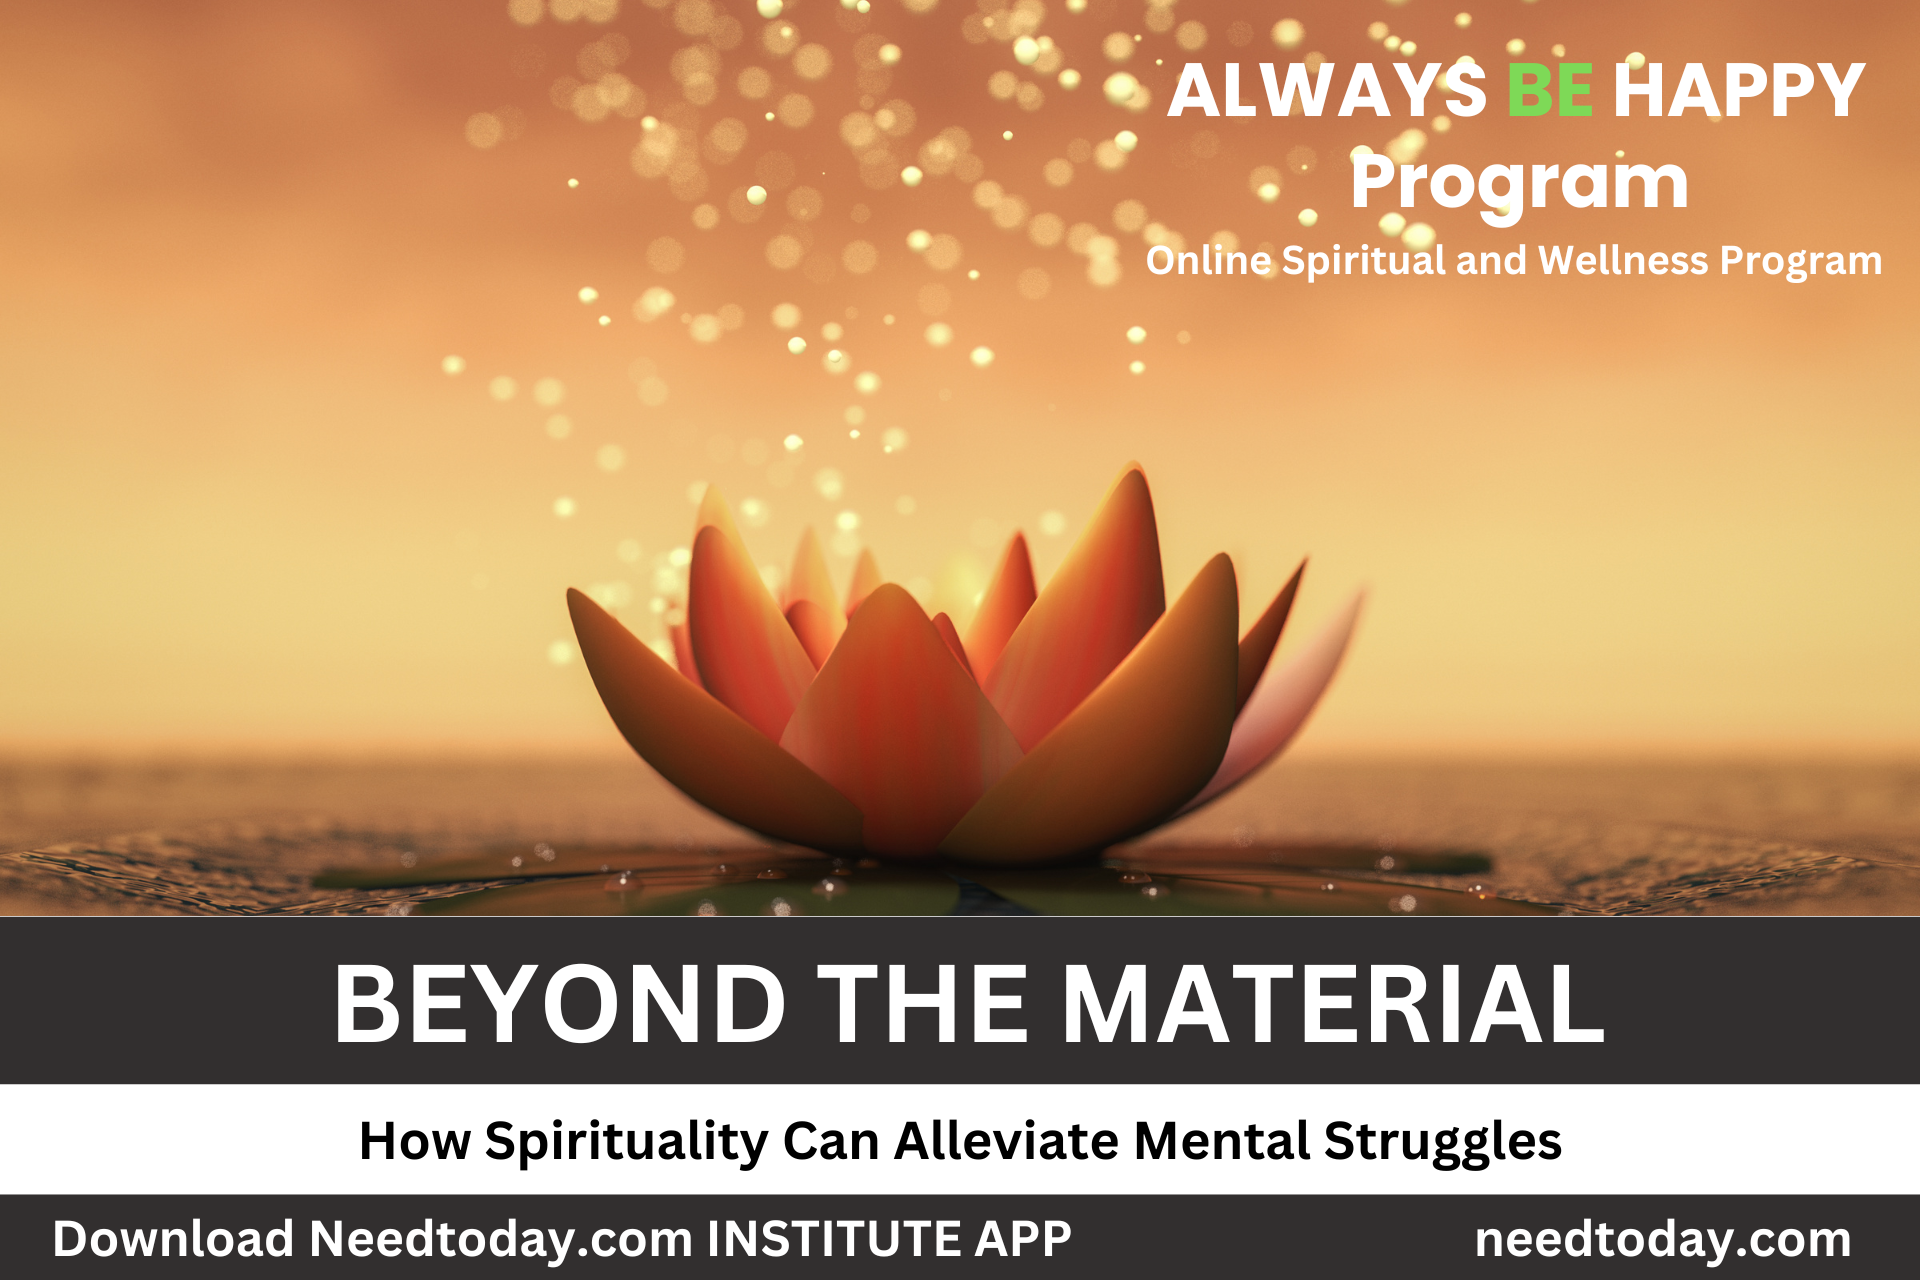 Beyond the Material: How Spirituality Can Alleviate Mental Struggles